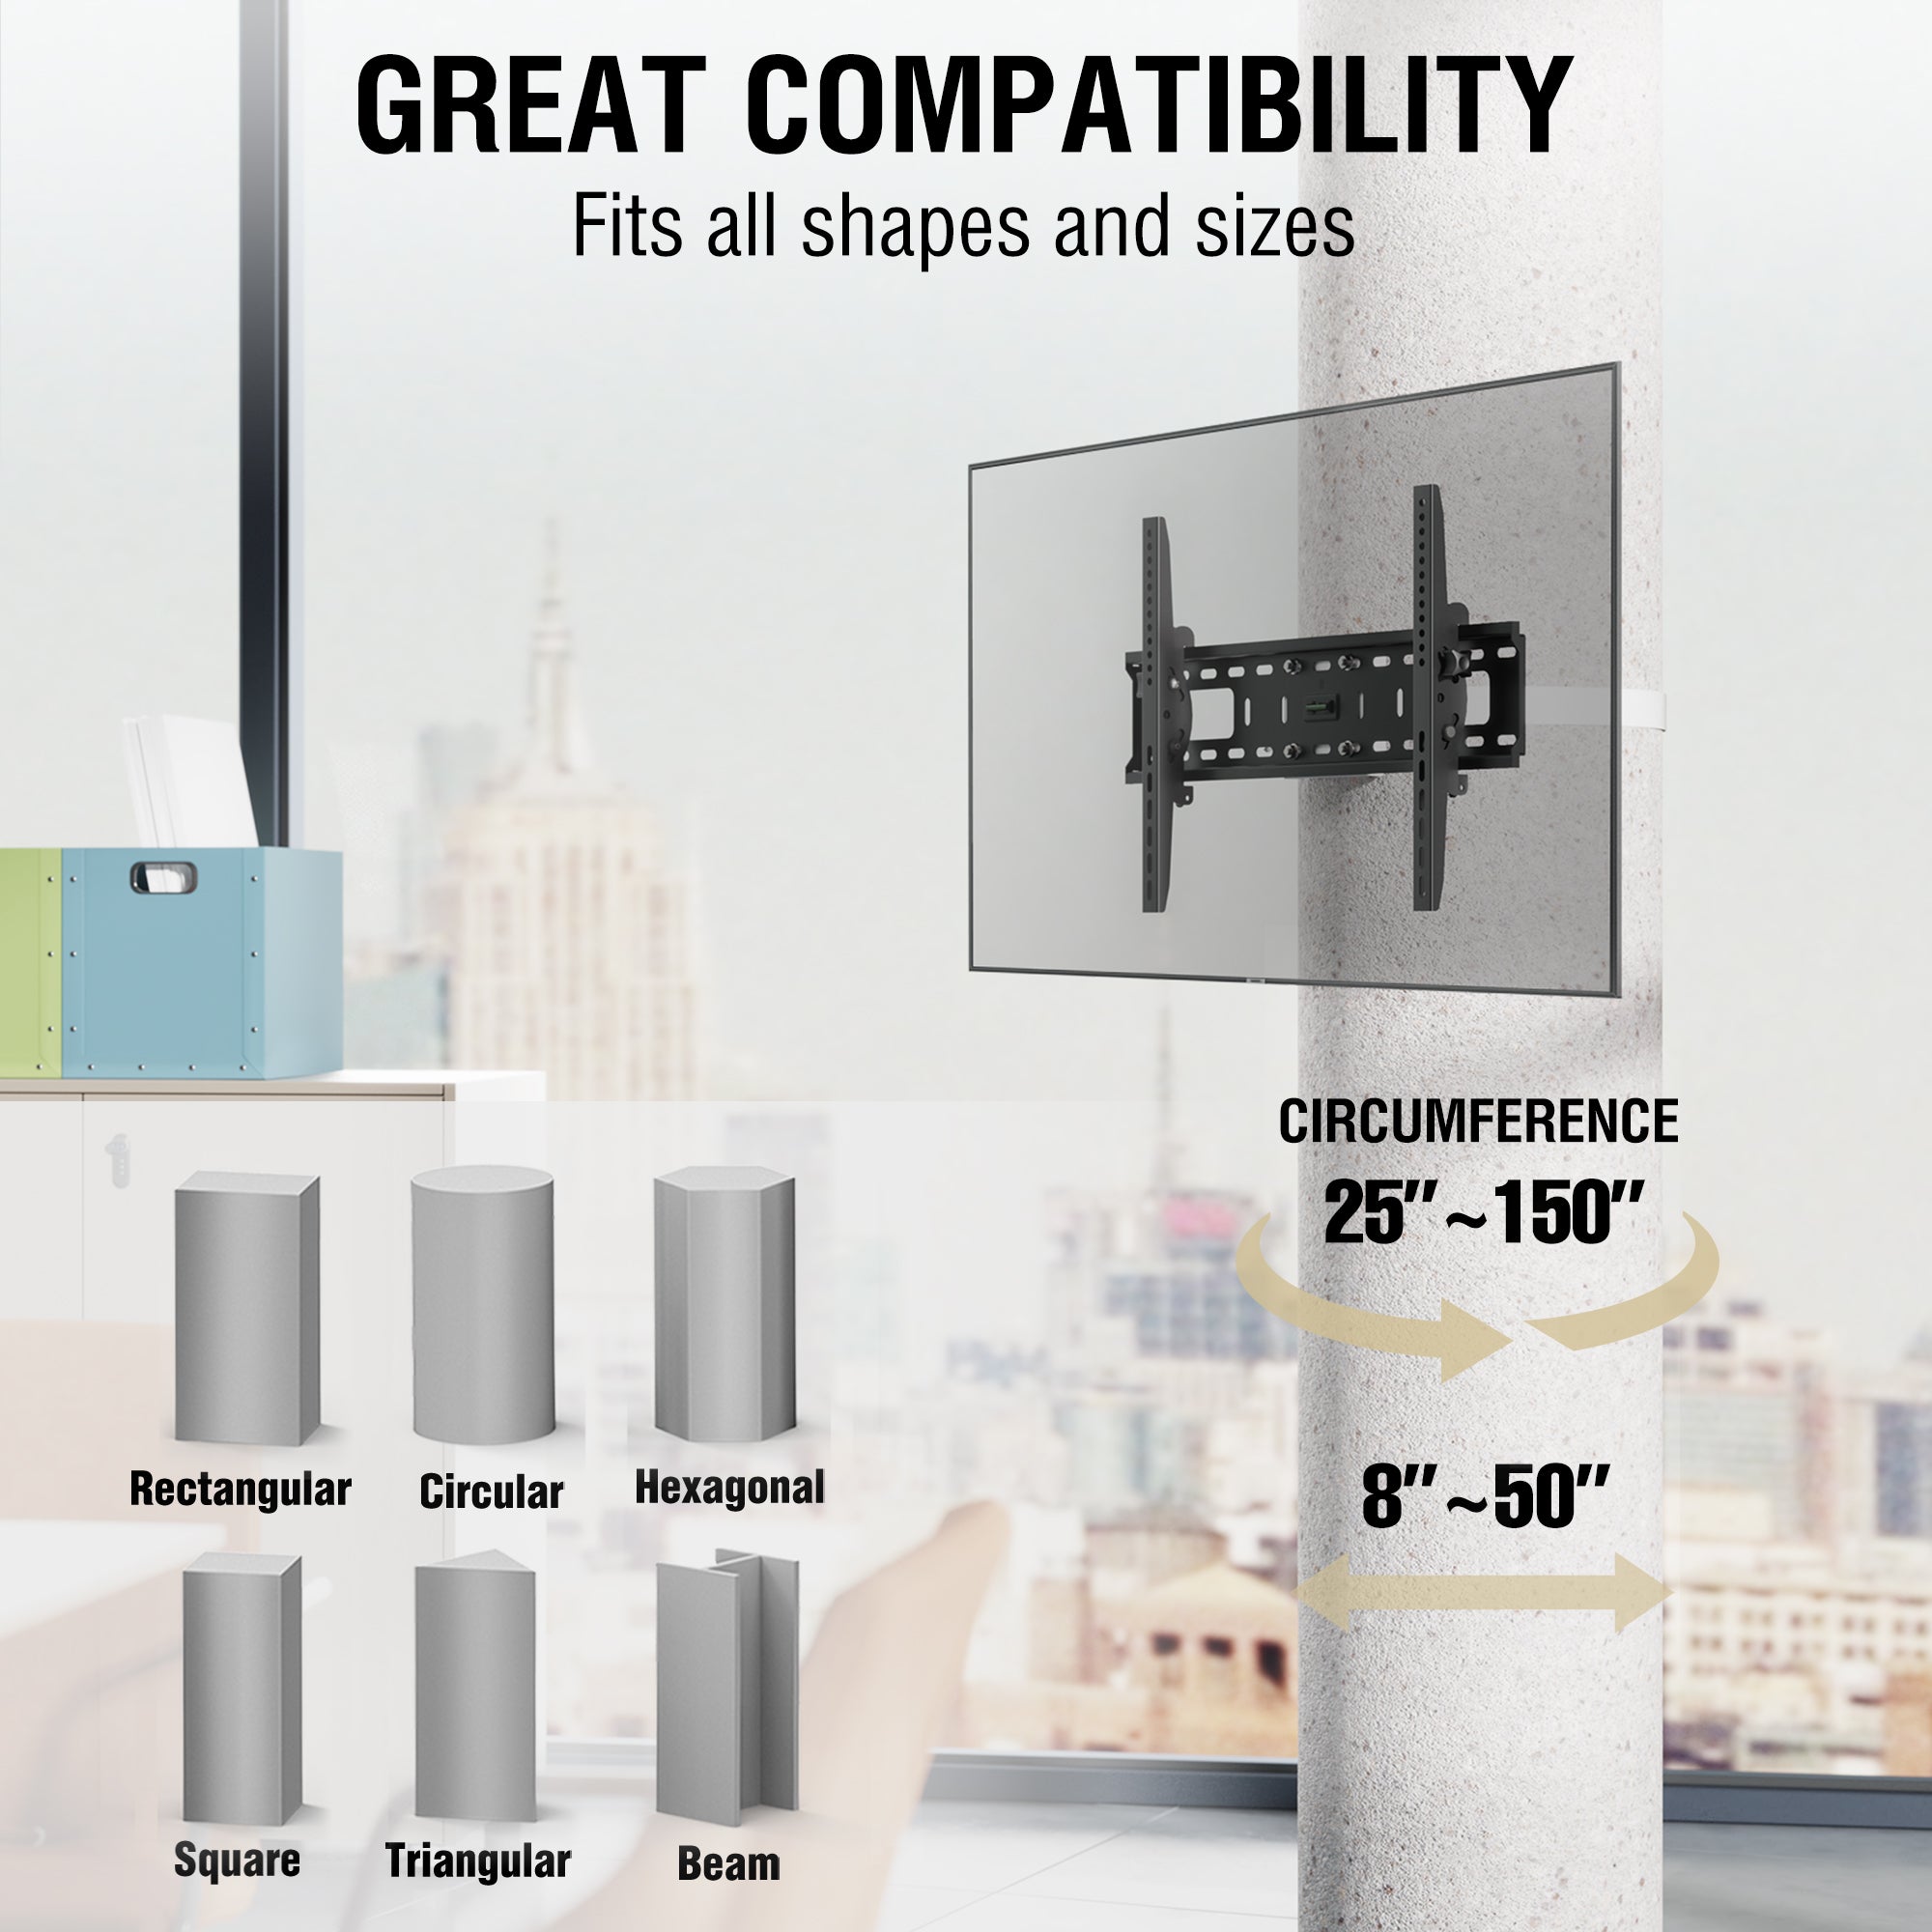 CondoMounts TILT Only-Large Pillar TV Mount | Column TV Mount | Round & Square Post TV Mount | No Drill | Holds 120lbs | Fits 37-in. to 85-in. TVs | Fits Pillars 8-in & Wider | White Strap